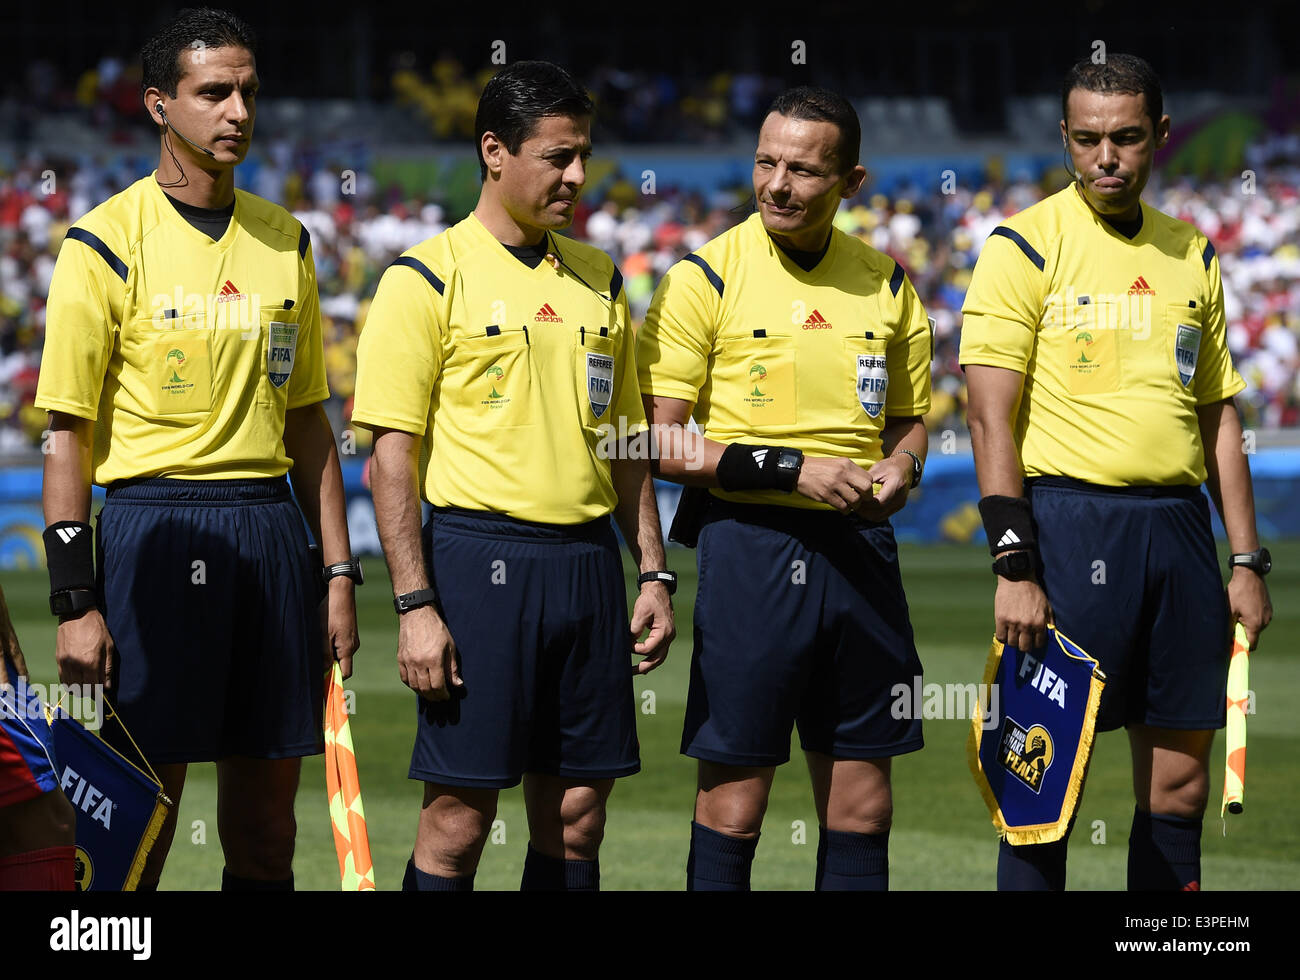 Belo Horizonte, Brazil. 24th June, 2014. Referee officials for a Group D match between Costa Rica and England of 2014 FIFA World Cup are seen at the Estadio Mineirao Stadium in Belo Horizonte, Brazil, on June 24, 2014. © Qi Heng/Xinhua/Alamy Live News Stock Photo